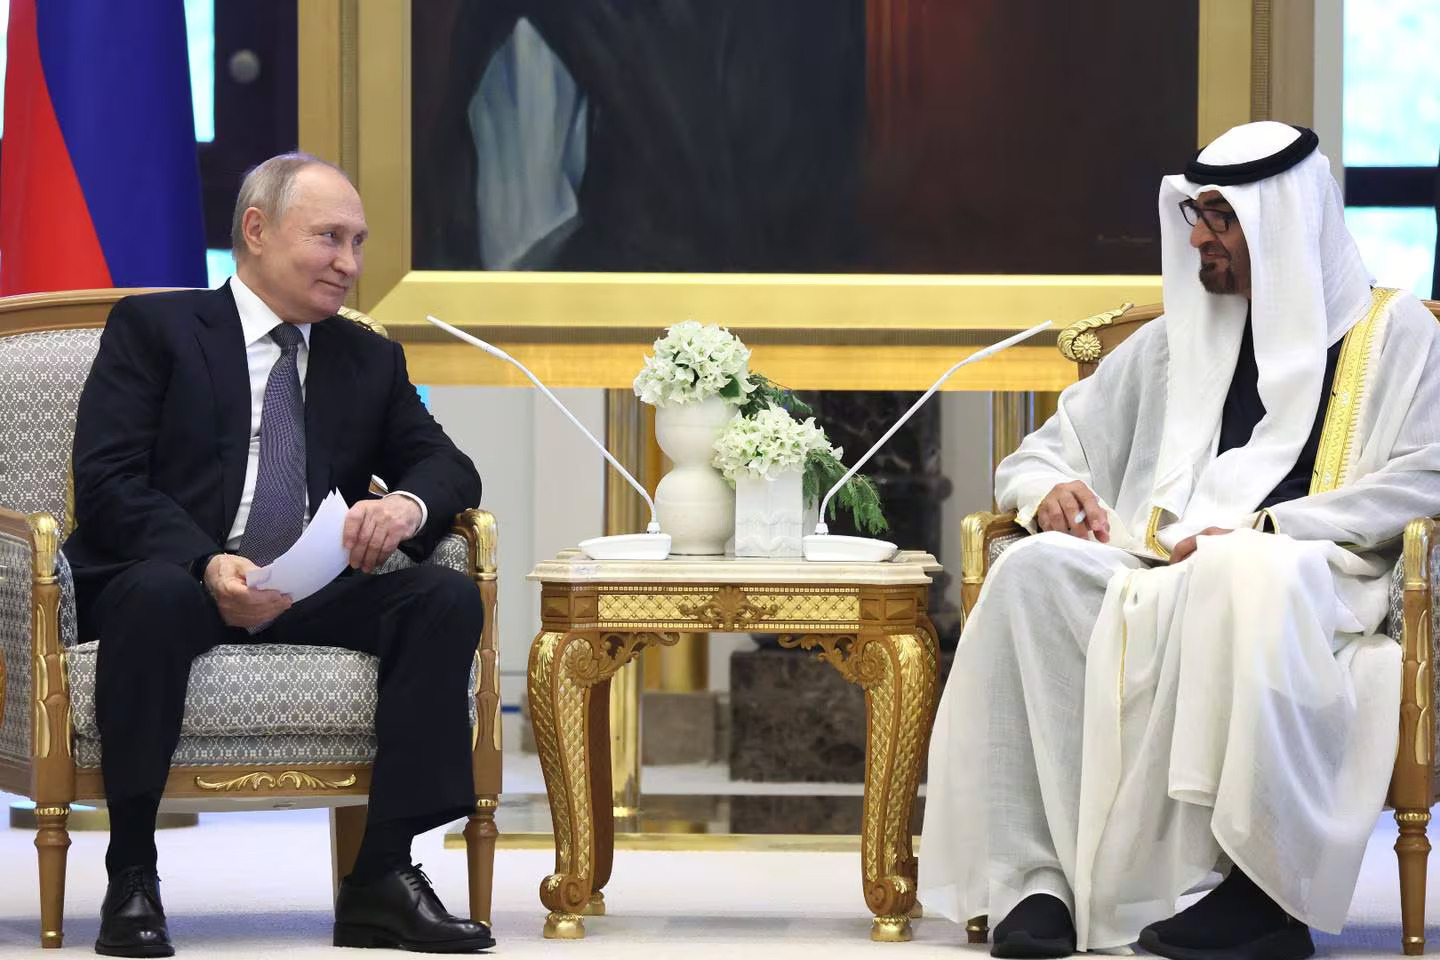 The Russian leader gave an official shindig in Abu Dhabi before going to Saudi Arabia, where he met with Crown Prince Mohammed bin Salman.